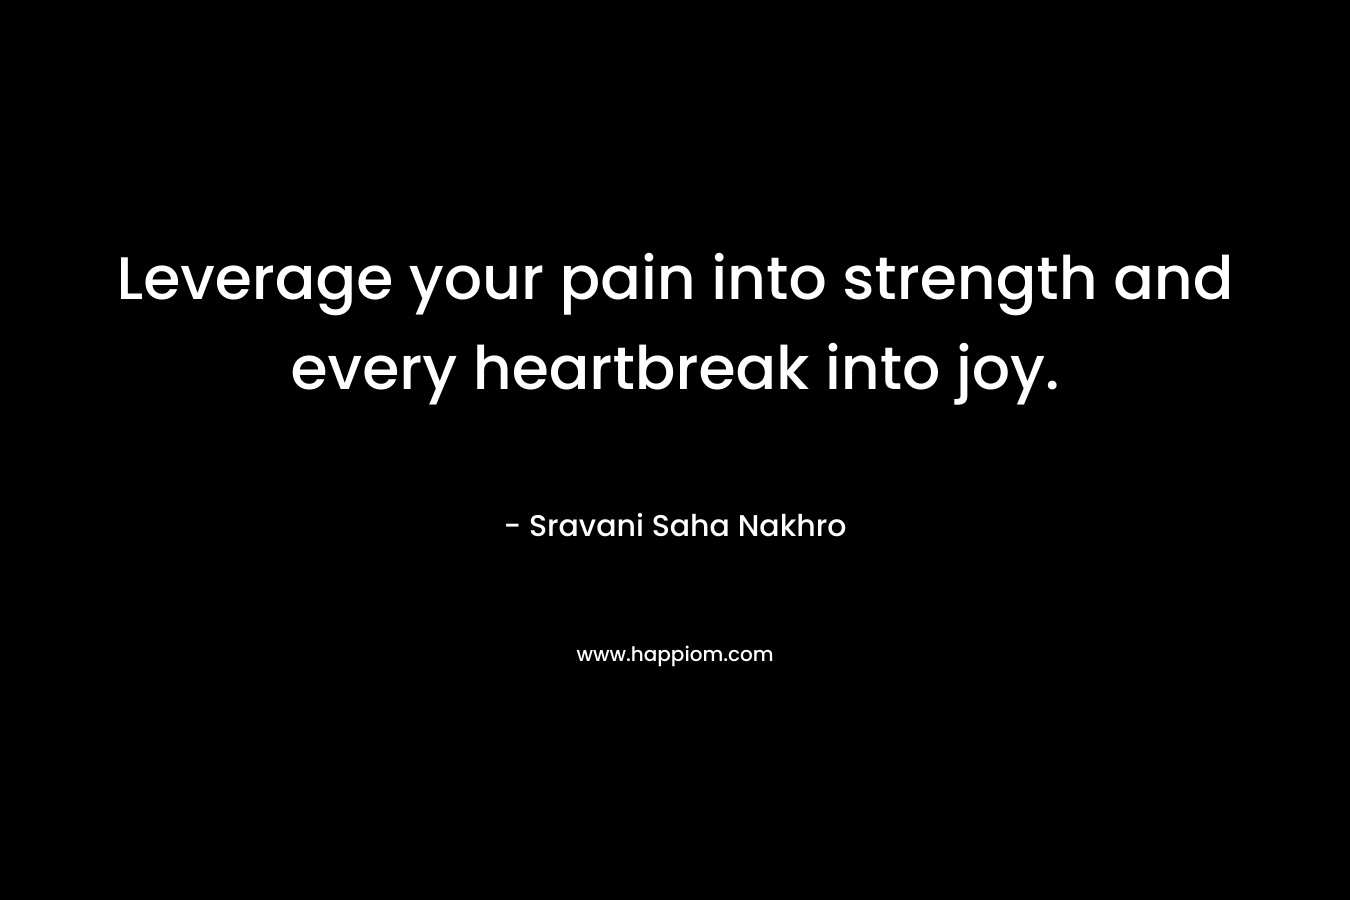 Leverage your pain into strength and every heartbreak into joy.